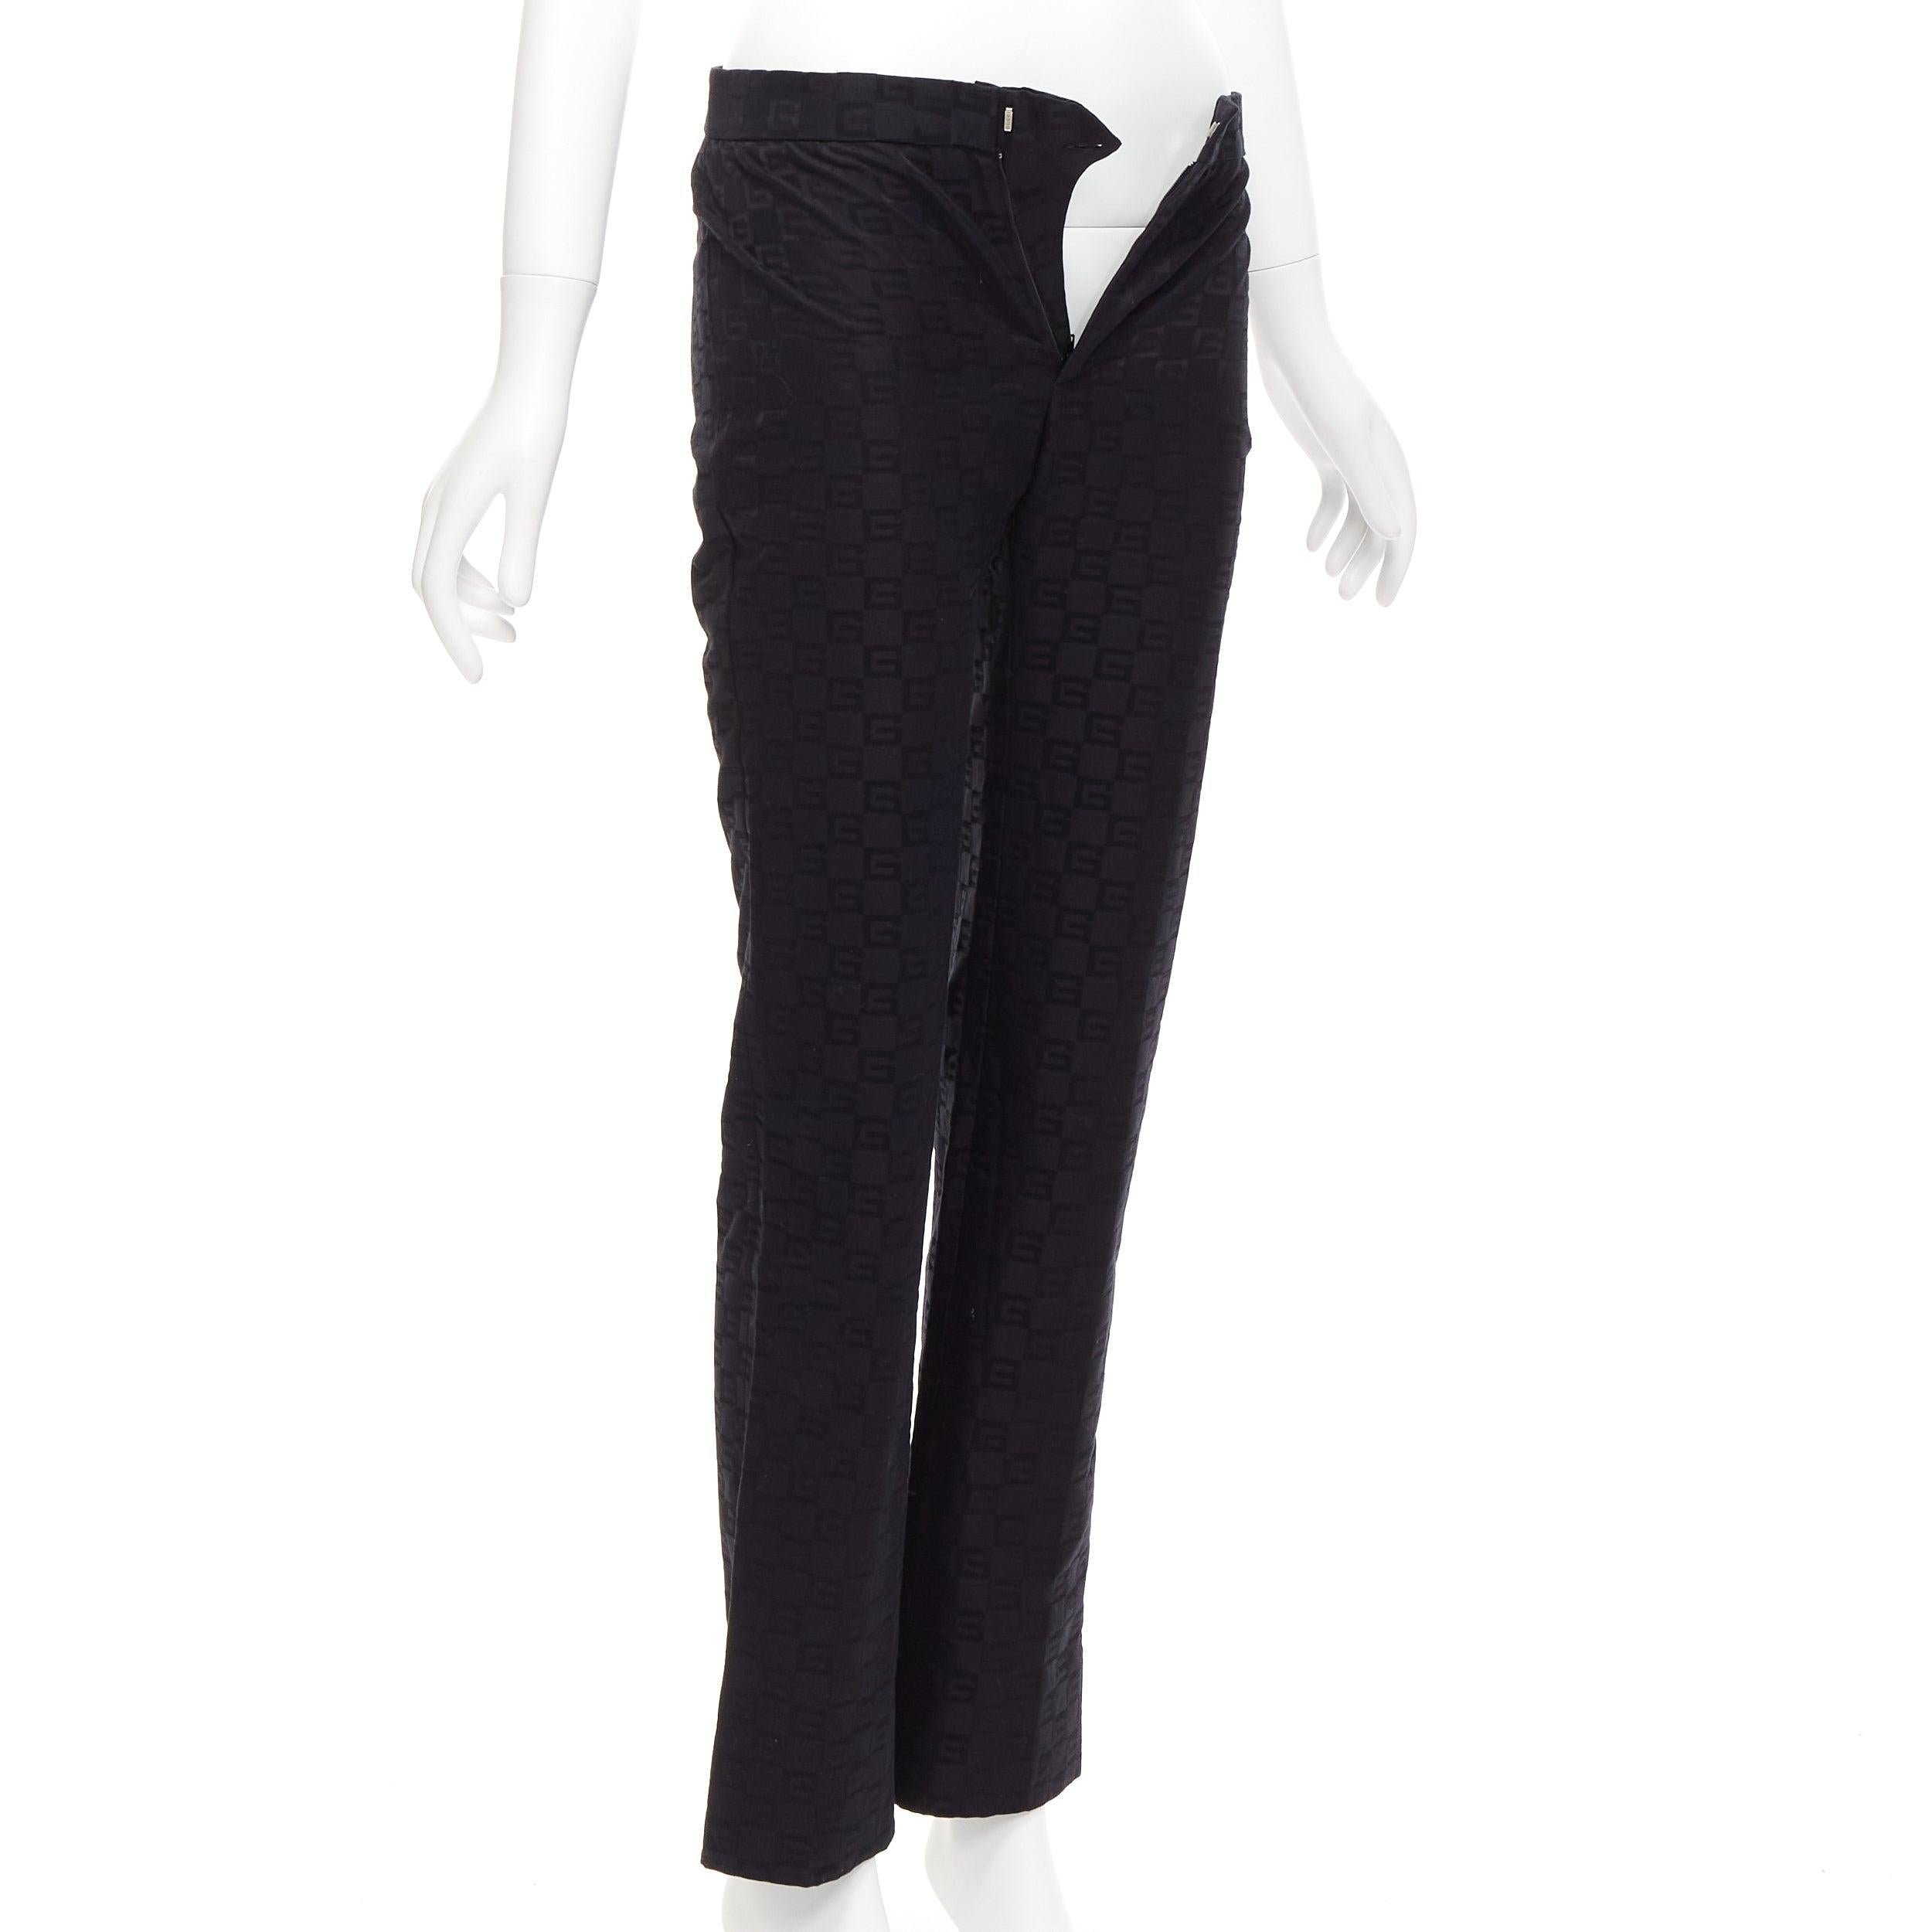 GUCCI Tom Ford Vintage GG monogram straight trousers pants IT38 XS
Reference: TGAS/D00997
Brand: Gucci
Designer: Tom Ford
Material: Cotton
Color: Black
Pattern: Monogram
Closure: Zip Fly
Lining: Black Rayon
Extra Details: GG monogram jacquard
Made